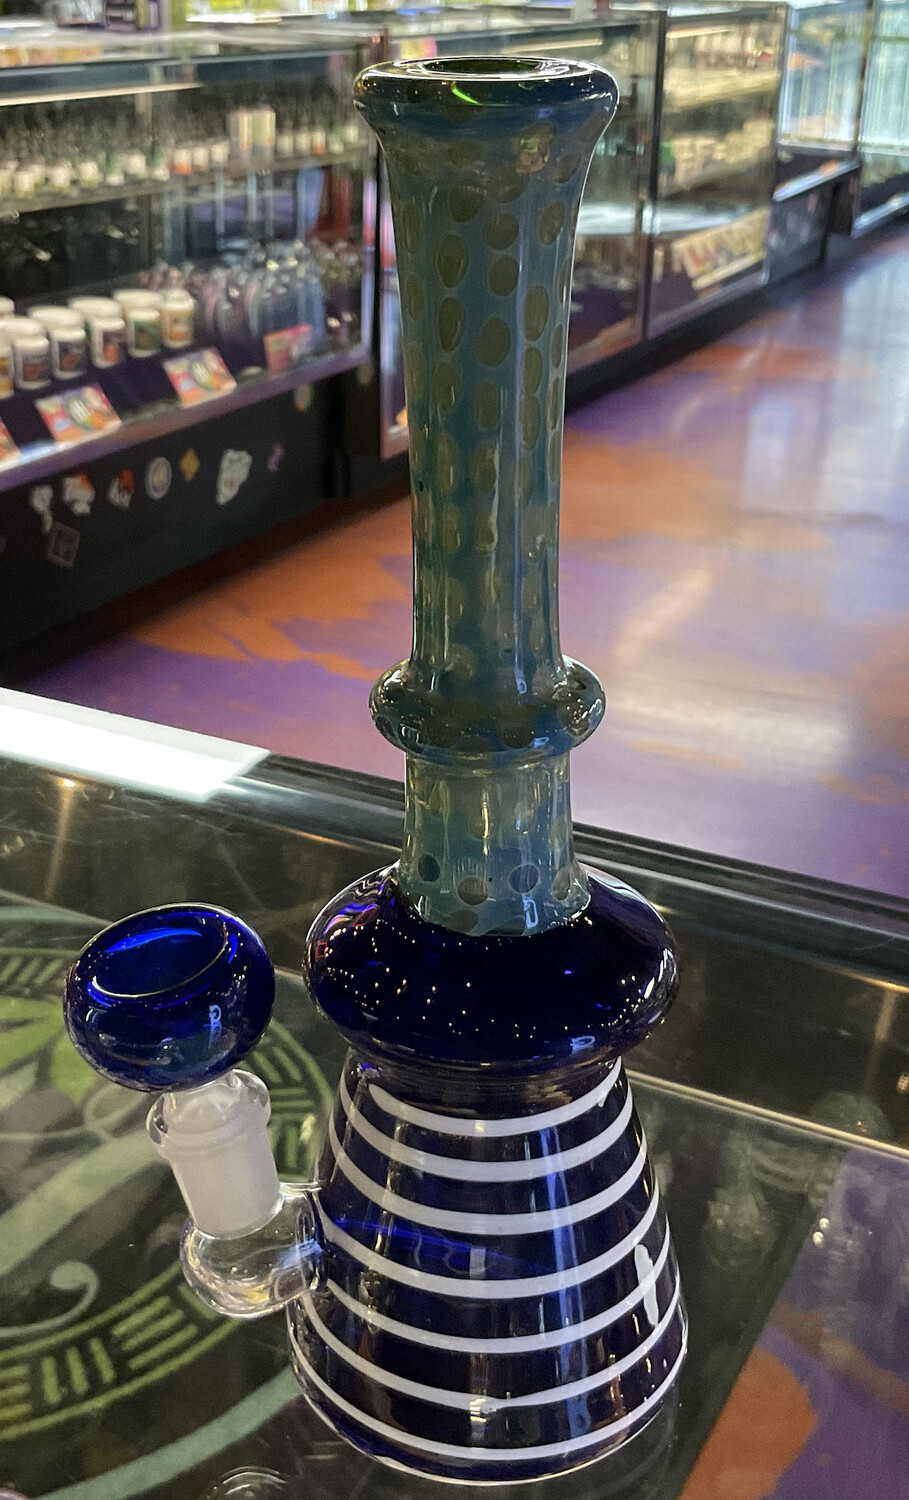 8" Blue stripped rig